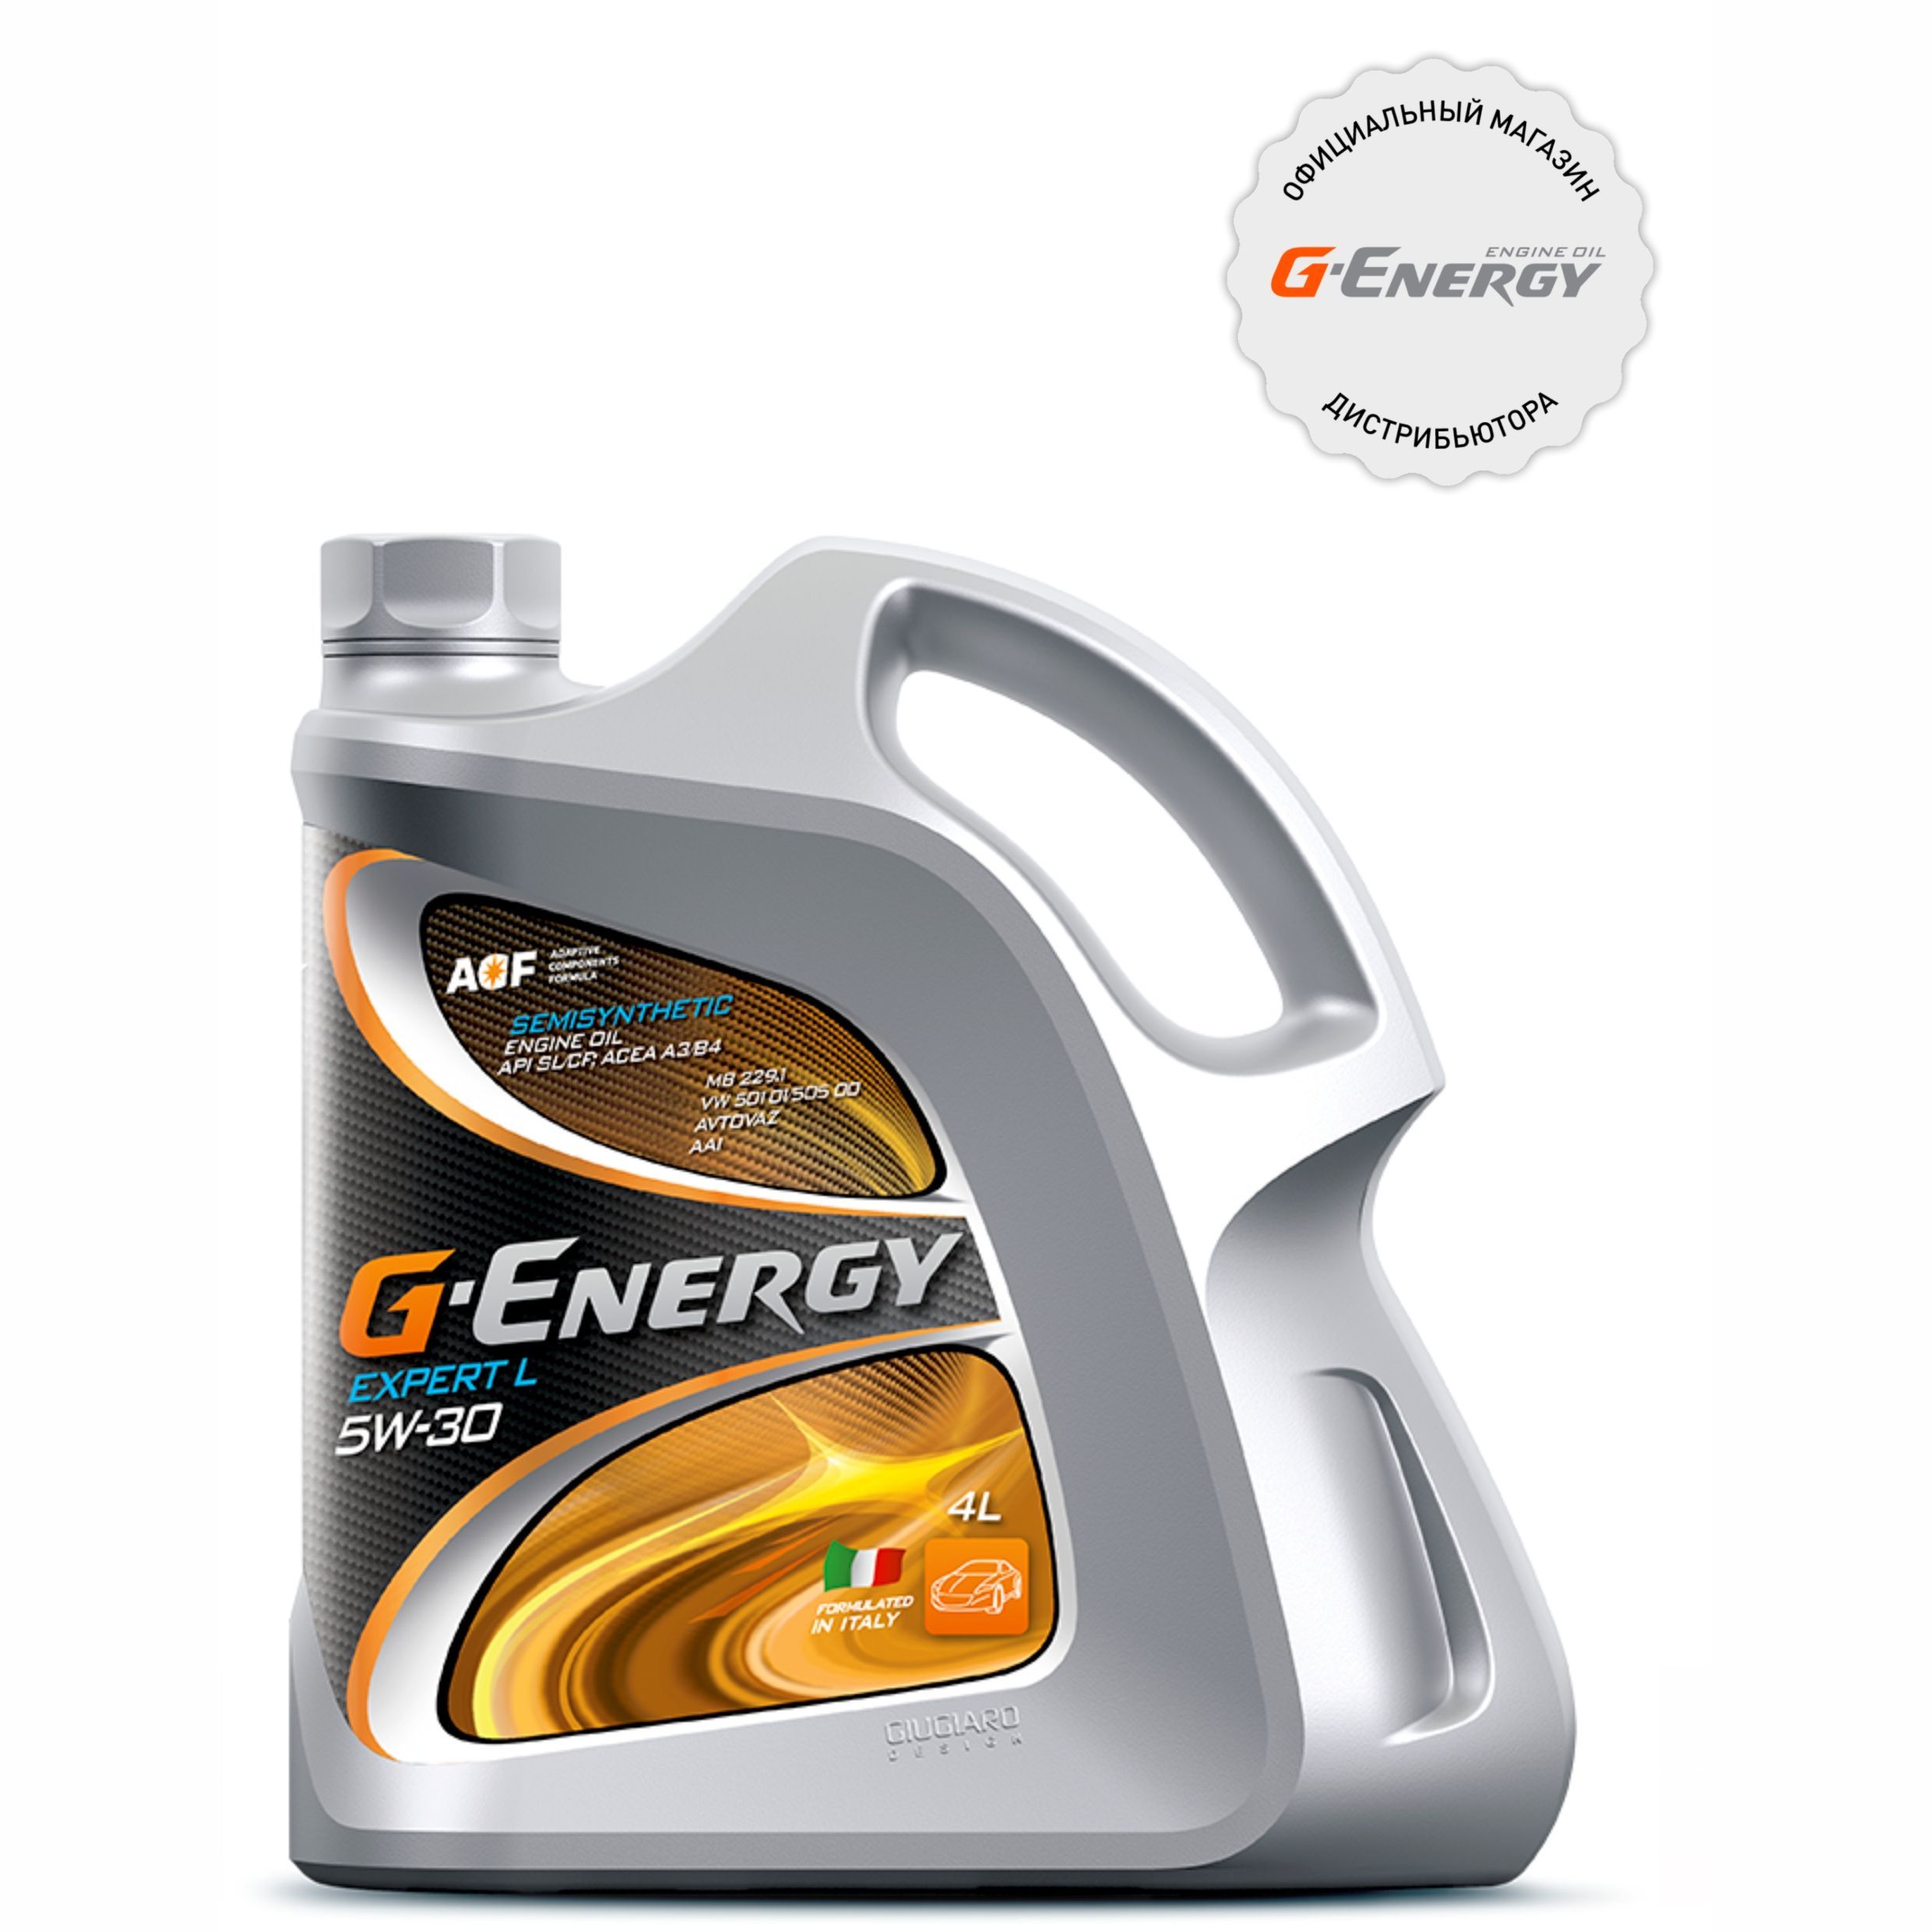 Energy synthetic long life 10w 40. G Energy 5w40 синтетика Active. G-Energy Synthetic Active 5w40 4л. G-Energy Synthetic Active 5w-40. G-Energy Expert l 5w-40 4 л..